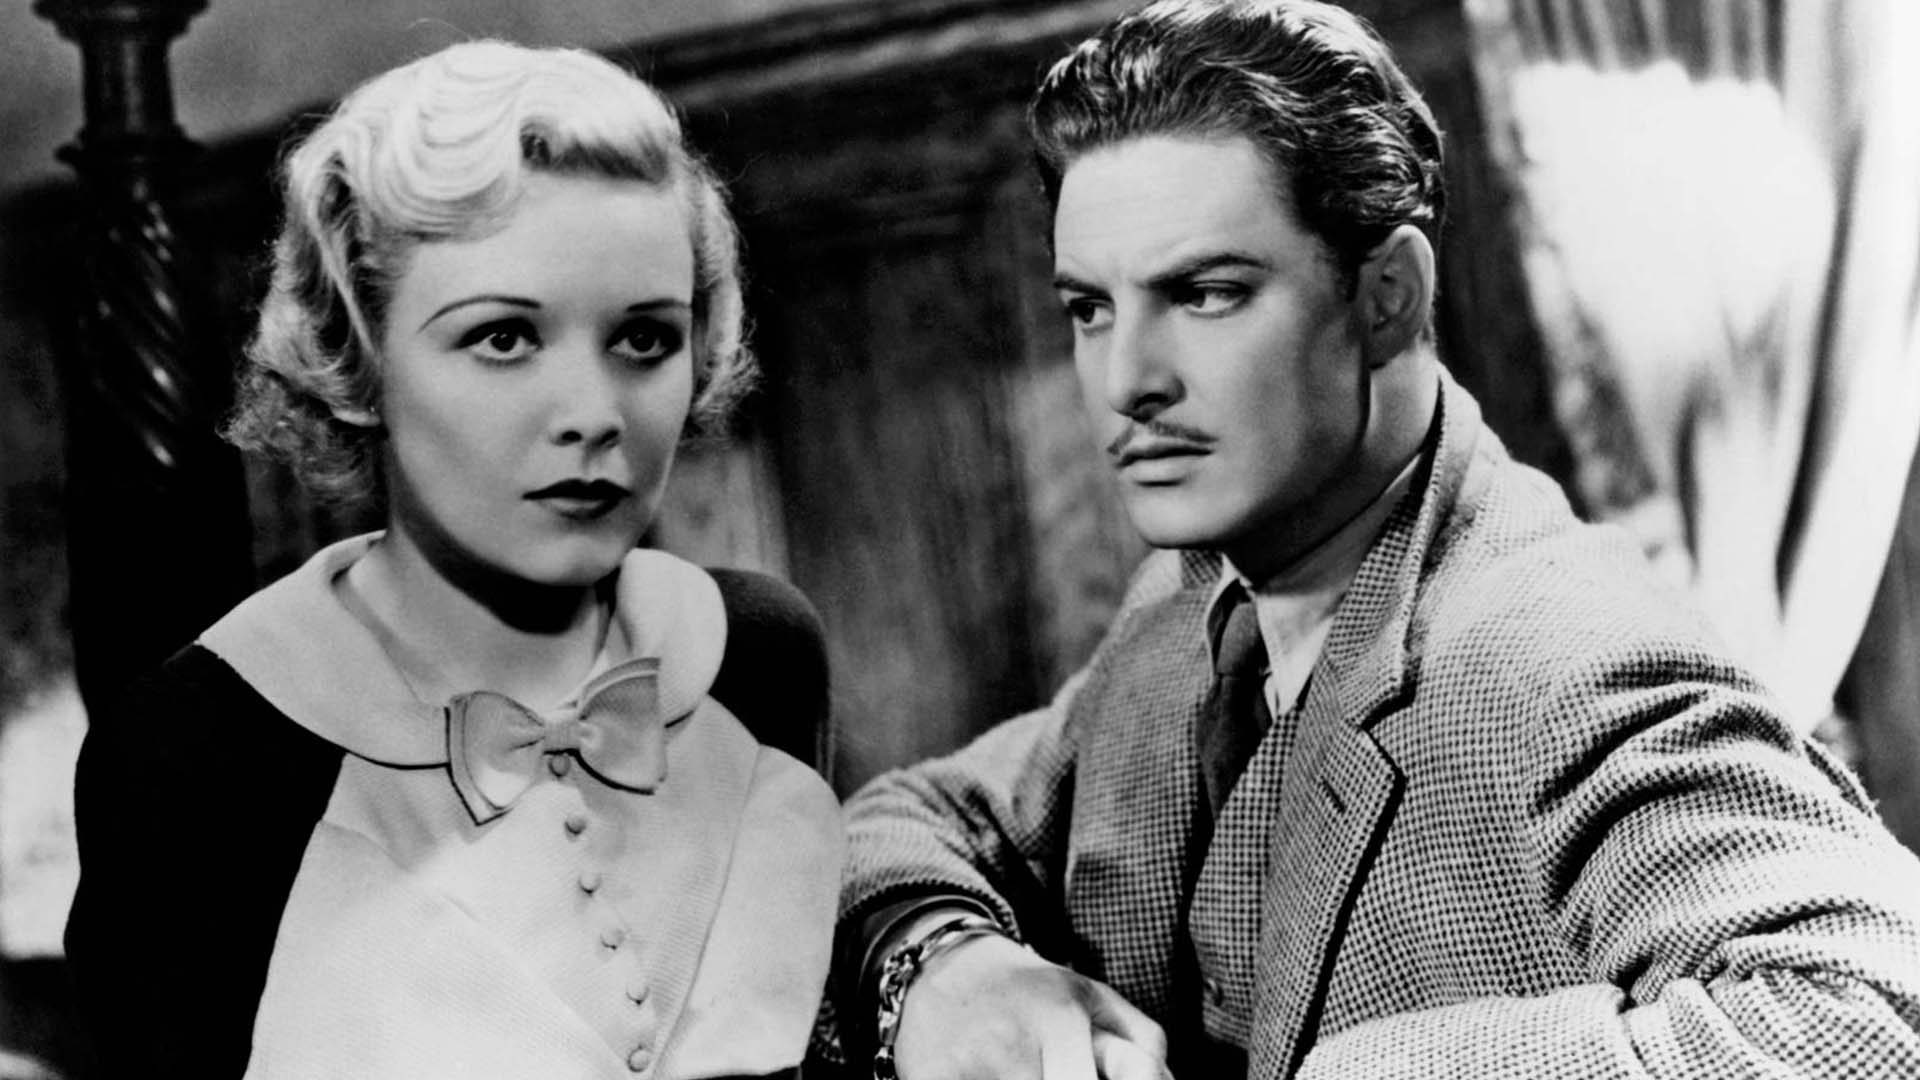 Robert Donat with Madeline Carroll in The 39 Steps